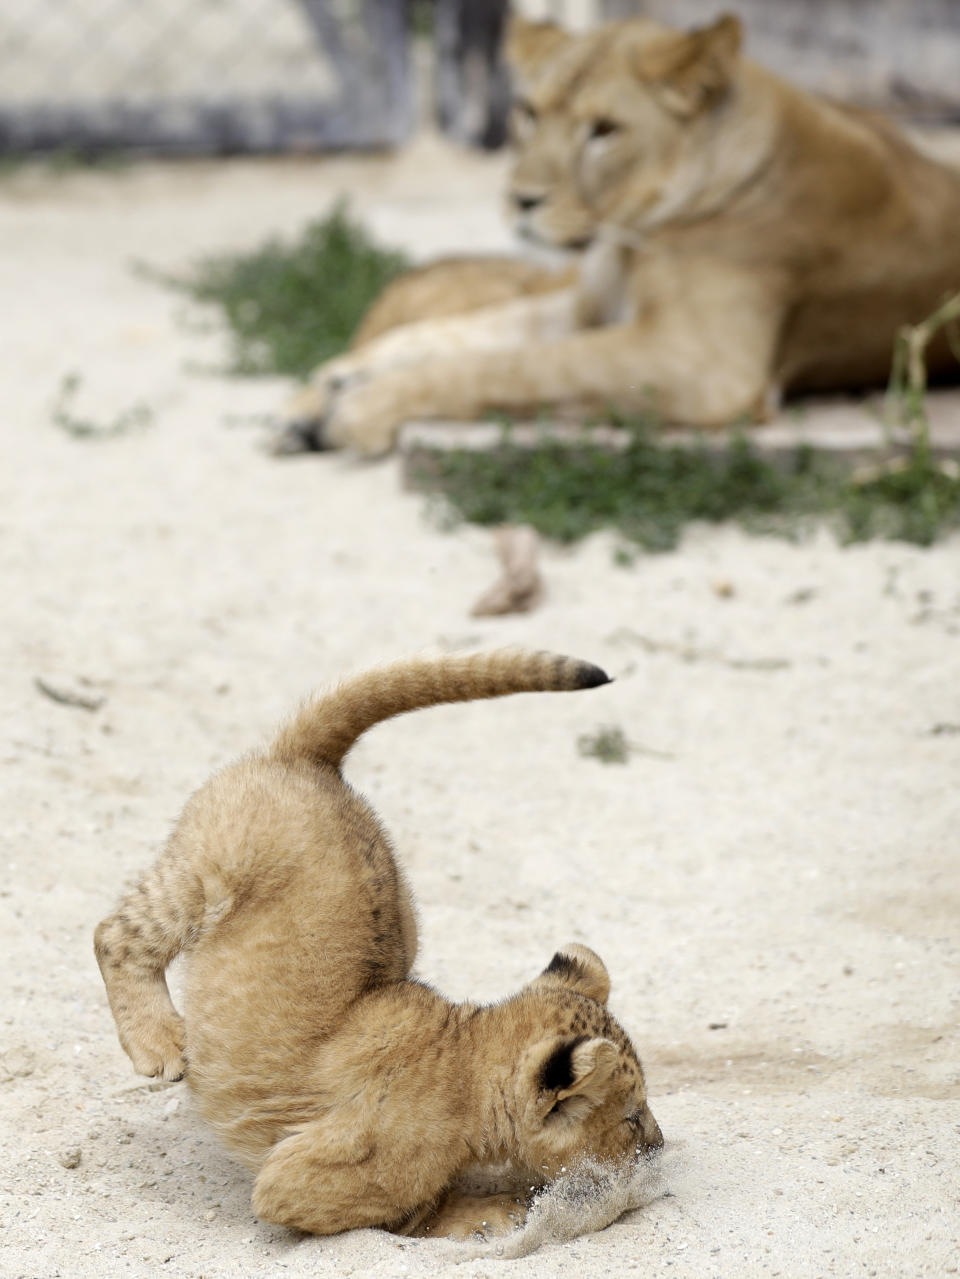 A Barbary lion cub jumps in its enclosure at the zoo in Dvur Kralove, Czech Republic, Monday, July 8, 2019. Two Barbary lion cubs have been born in a Czech zoo, a welcome addition to a small surviving population of a rare majestic lion subspecies that has been extinct in the wild. A male and a female that have yet to be named were born on May 10 in the Dvur Kralove safari park. (AP Photo/Petr David Josek)